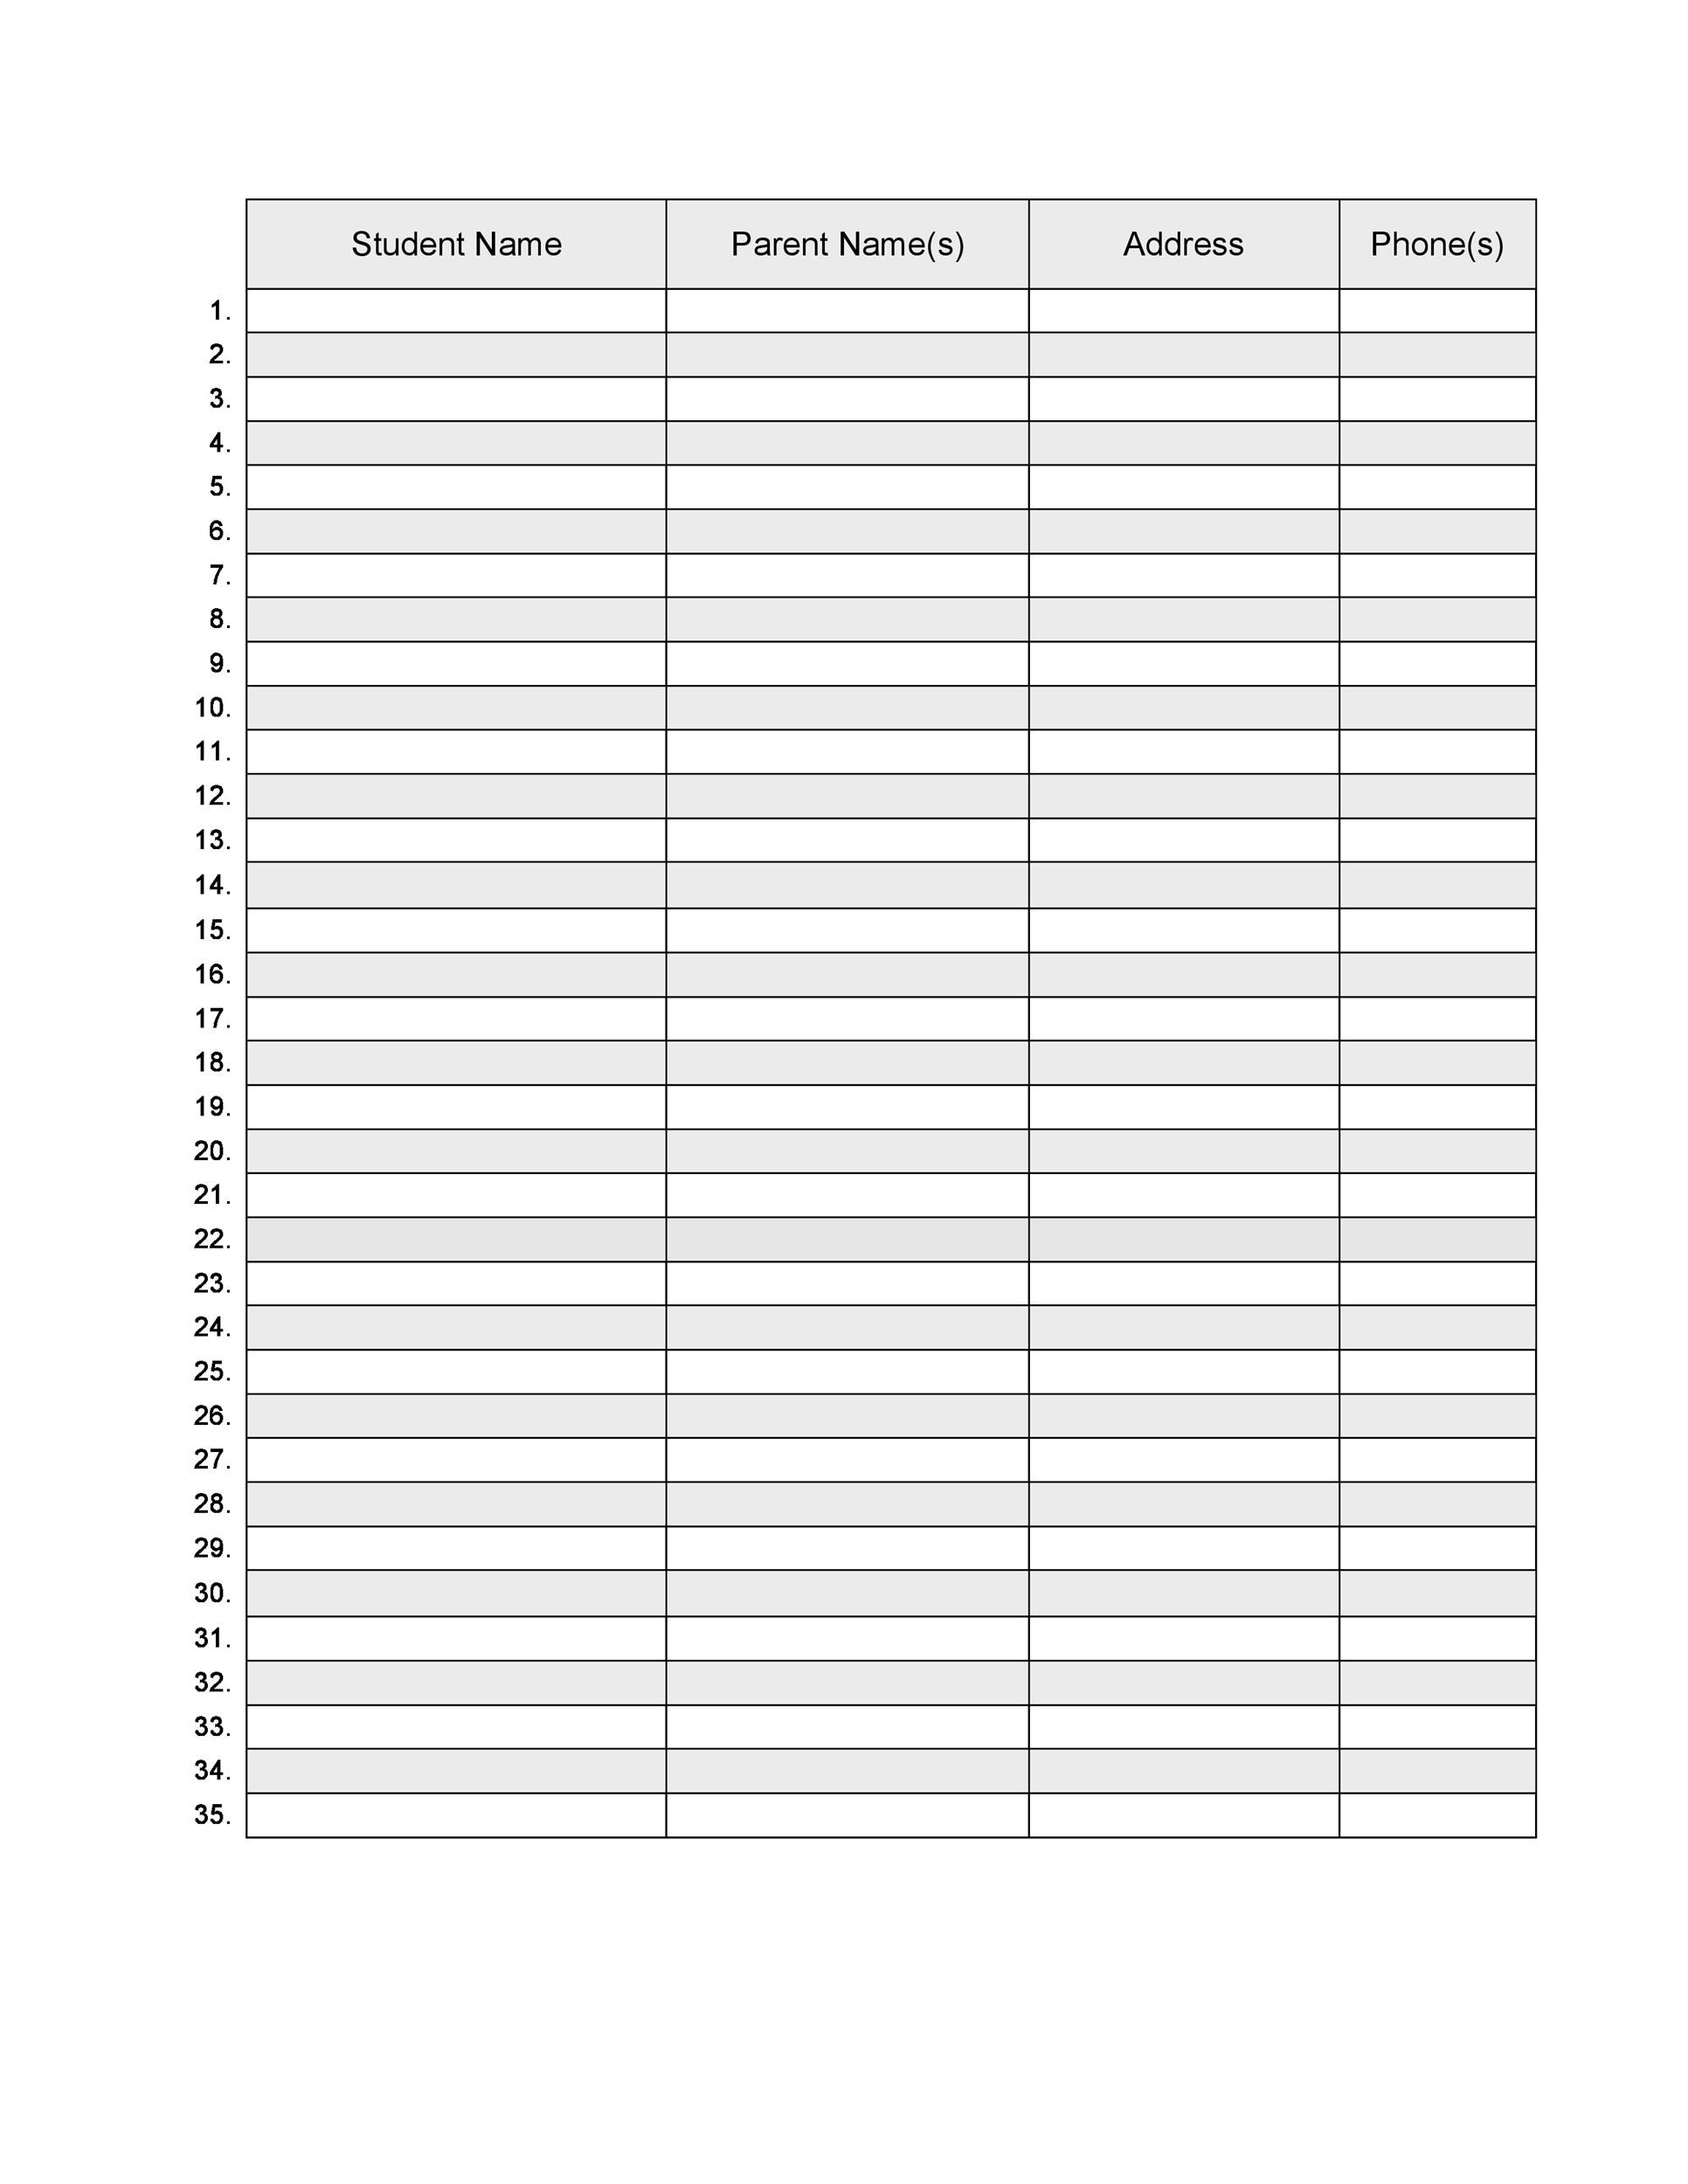 37-class-roster-templates-student-roster-templates-for-teachers